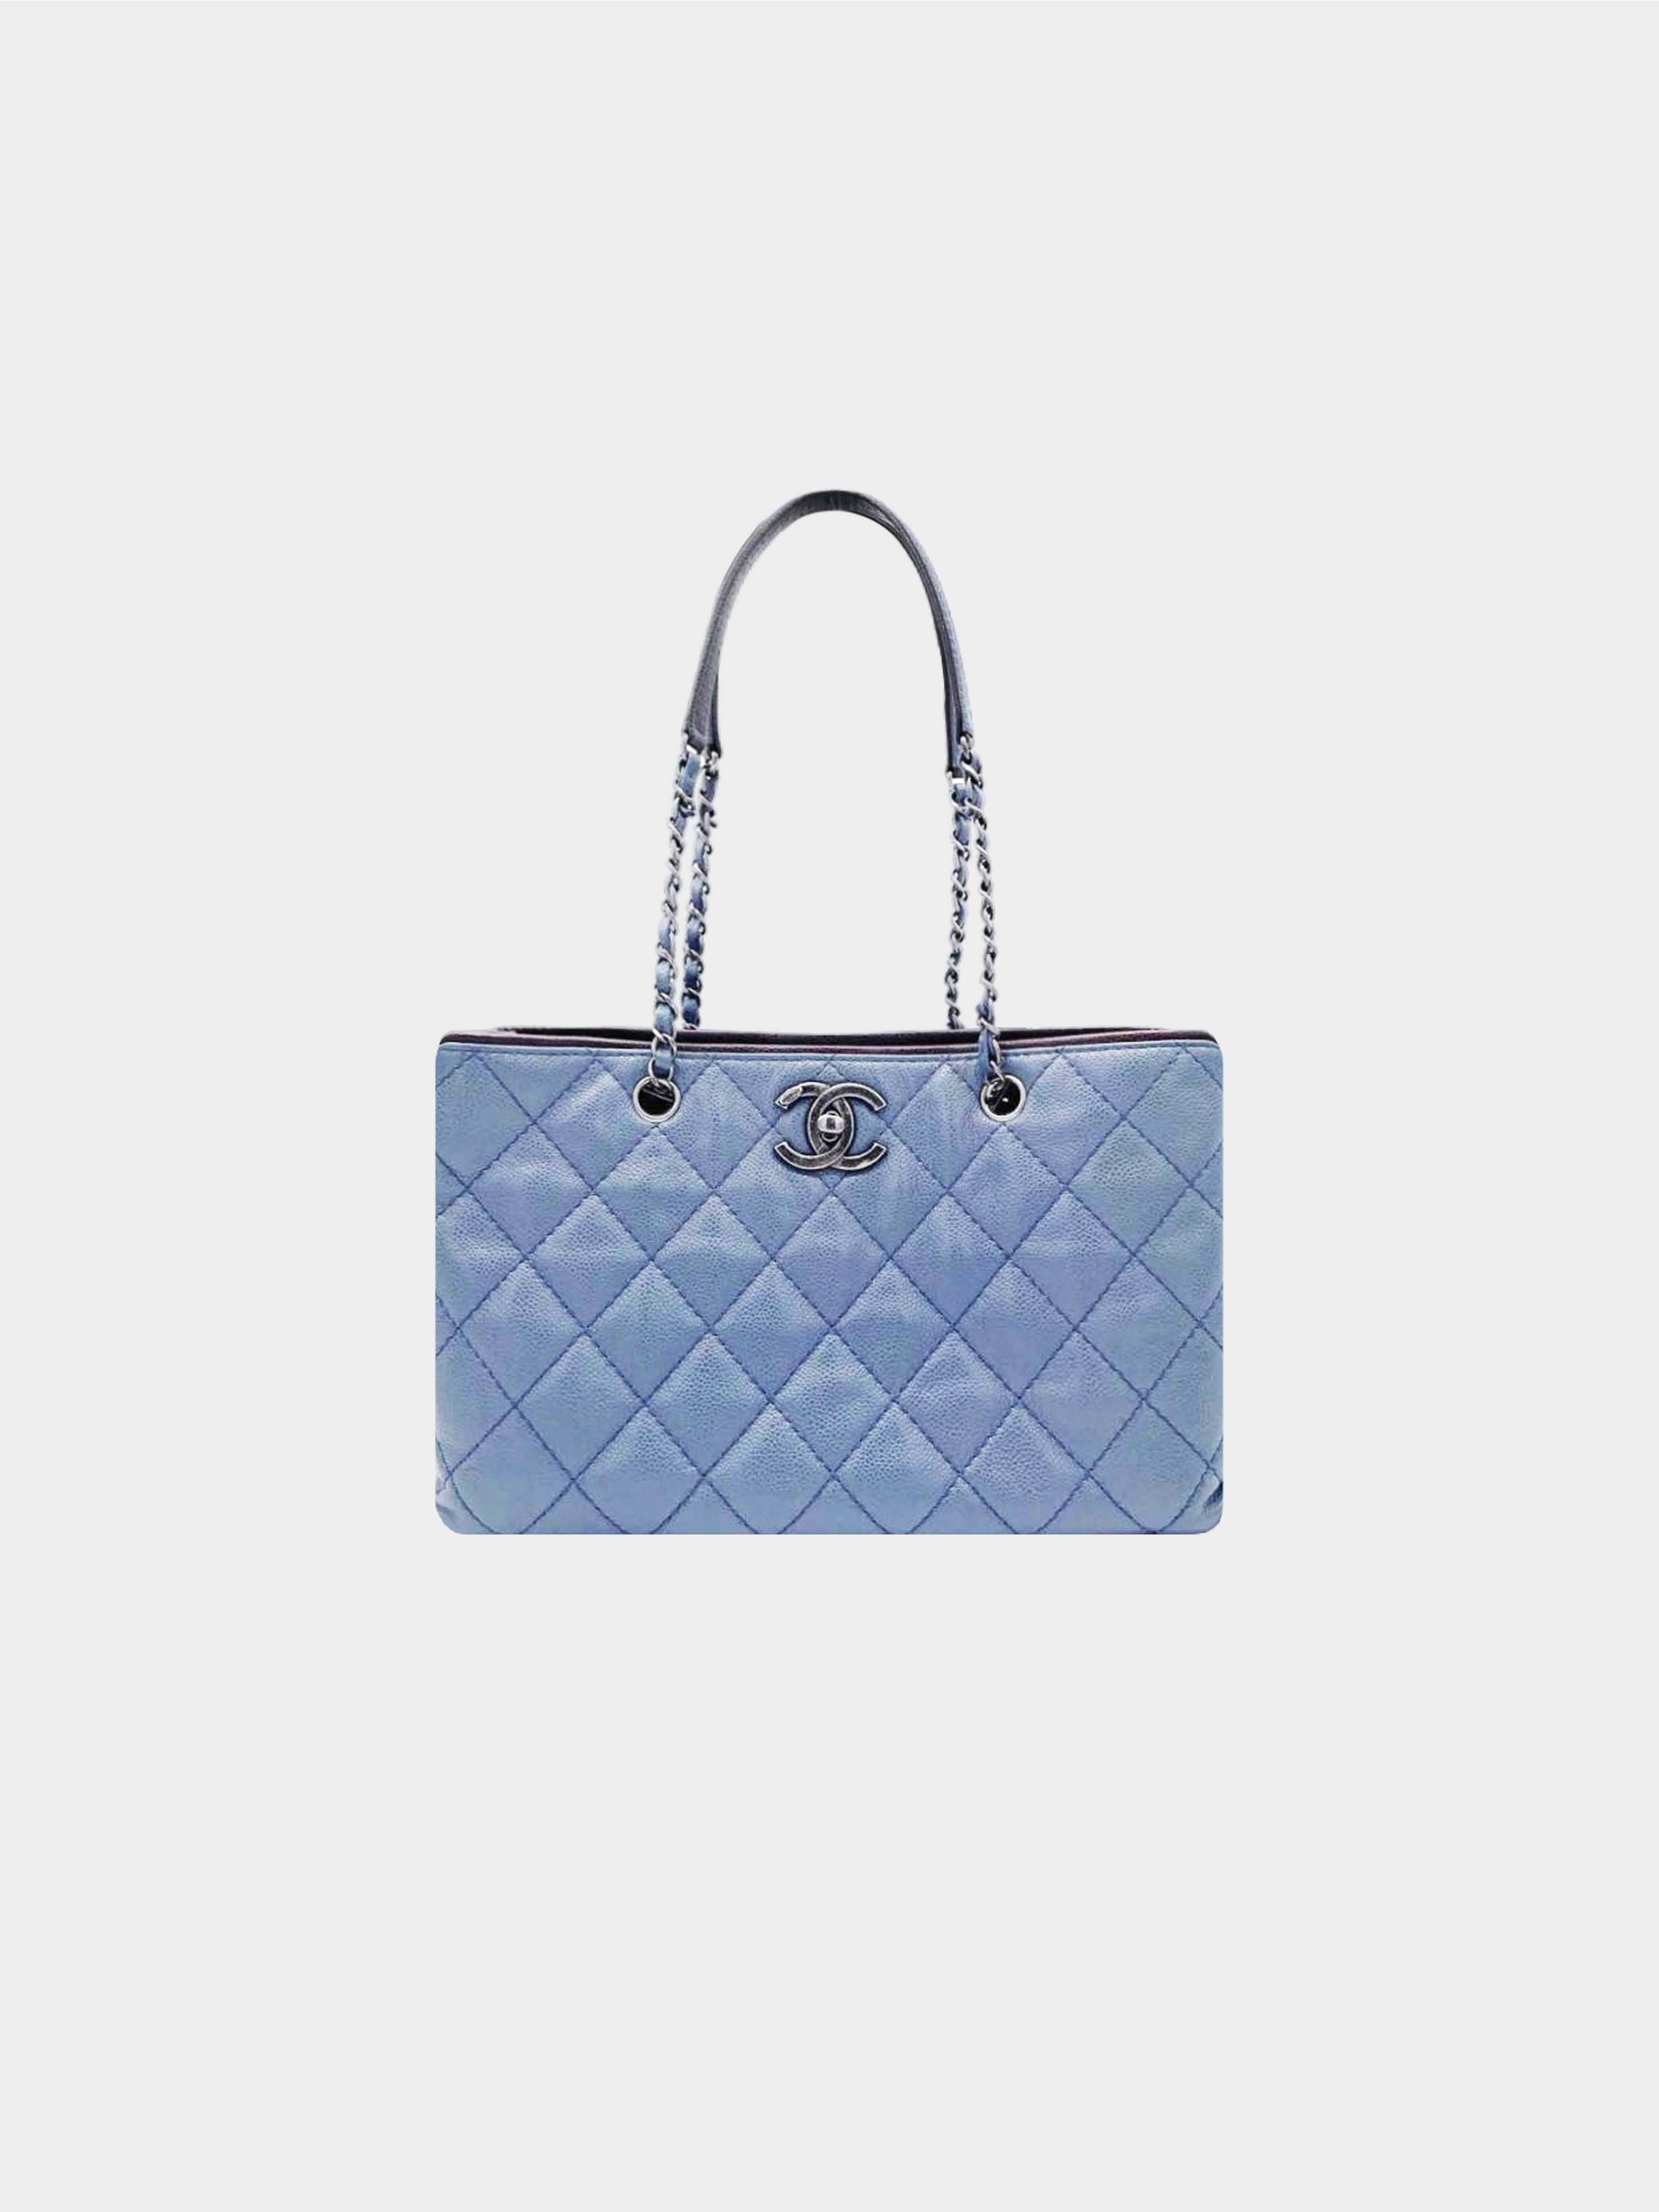 Chanel 2014 Dusty Blue Quilted Caviar Matelasse Chain Tote Bag